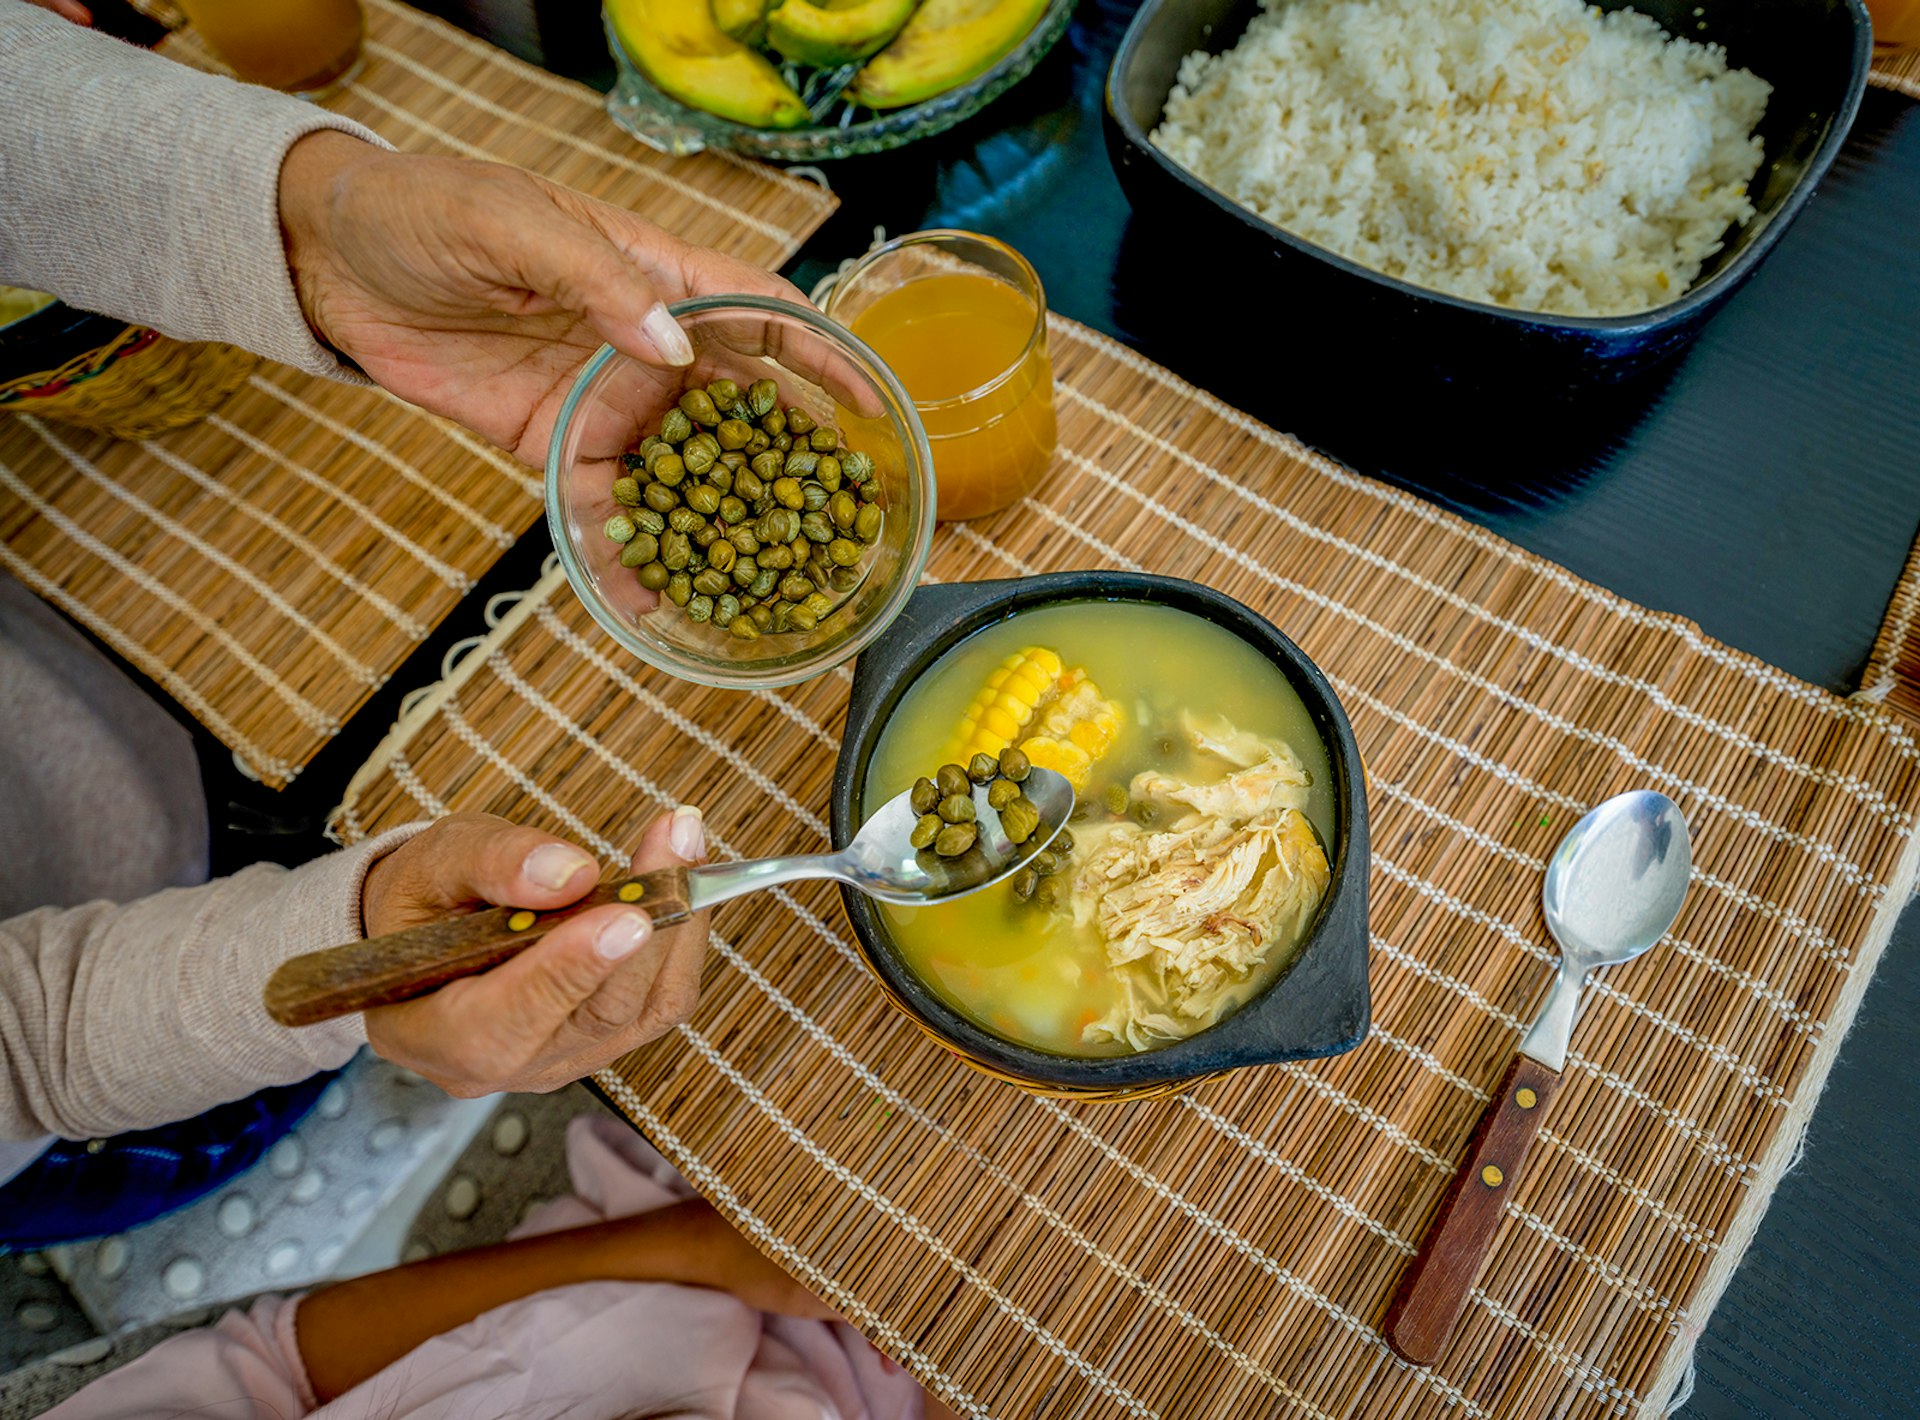 A person adds capers to a bowl of chicken and corn stew. A bowl of rice and a bowl of avocado sit on the table behind it. Colombia.